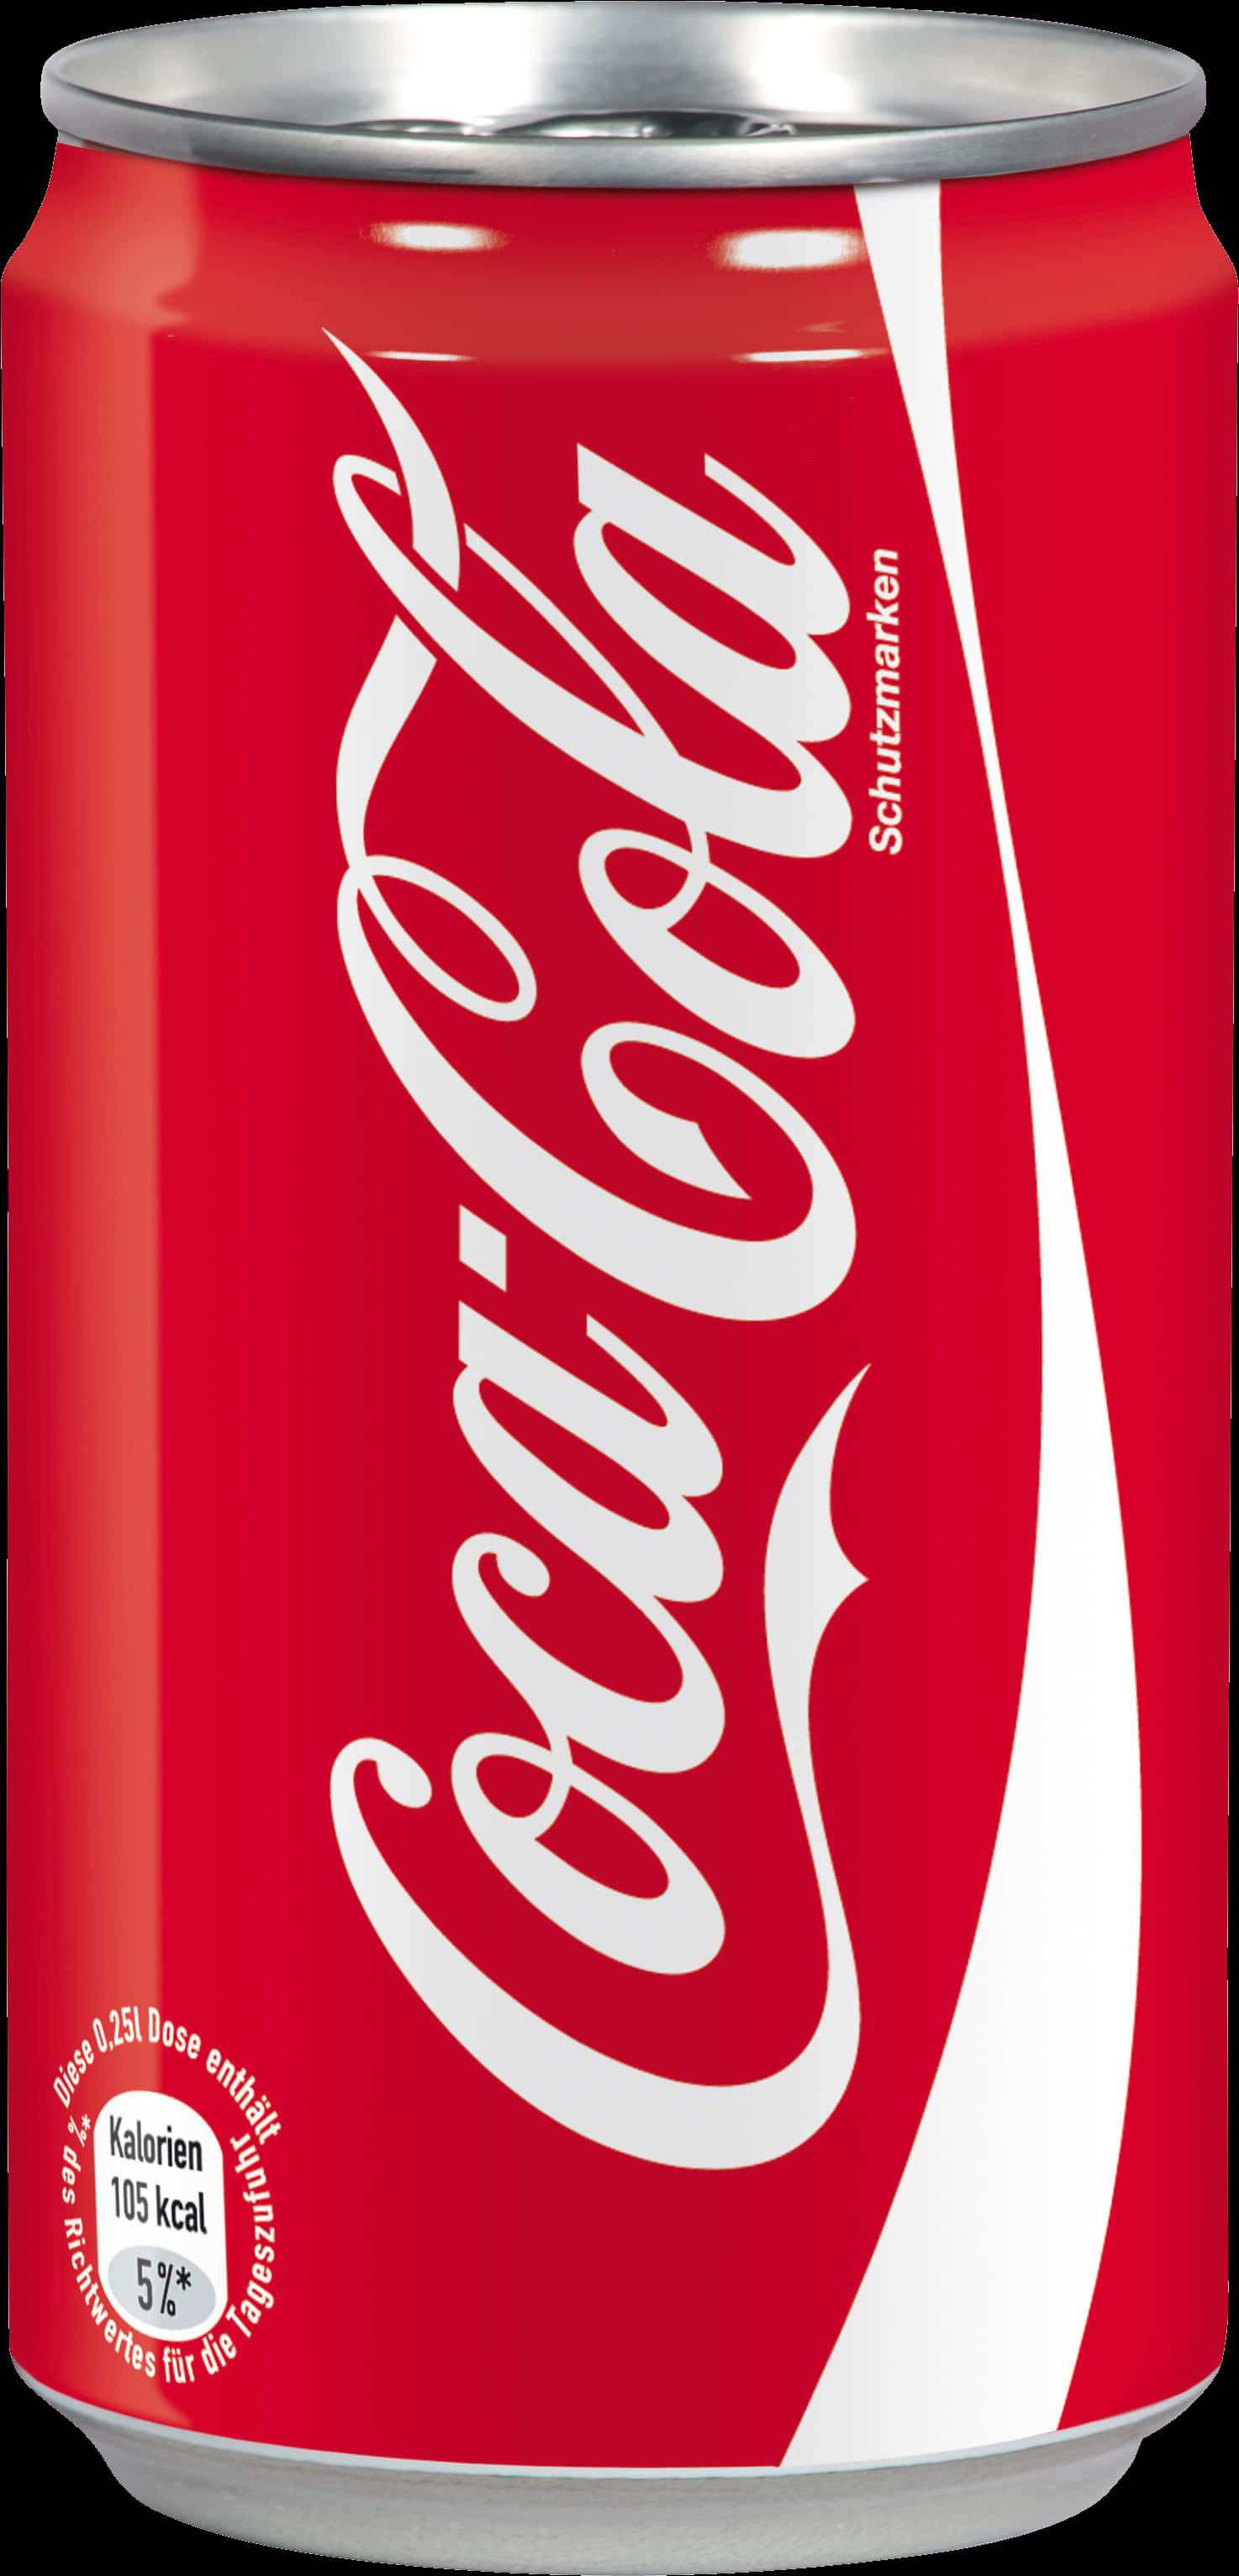 A Red Can With White Text